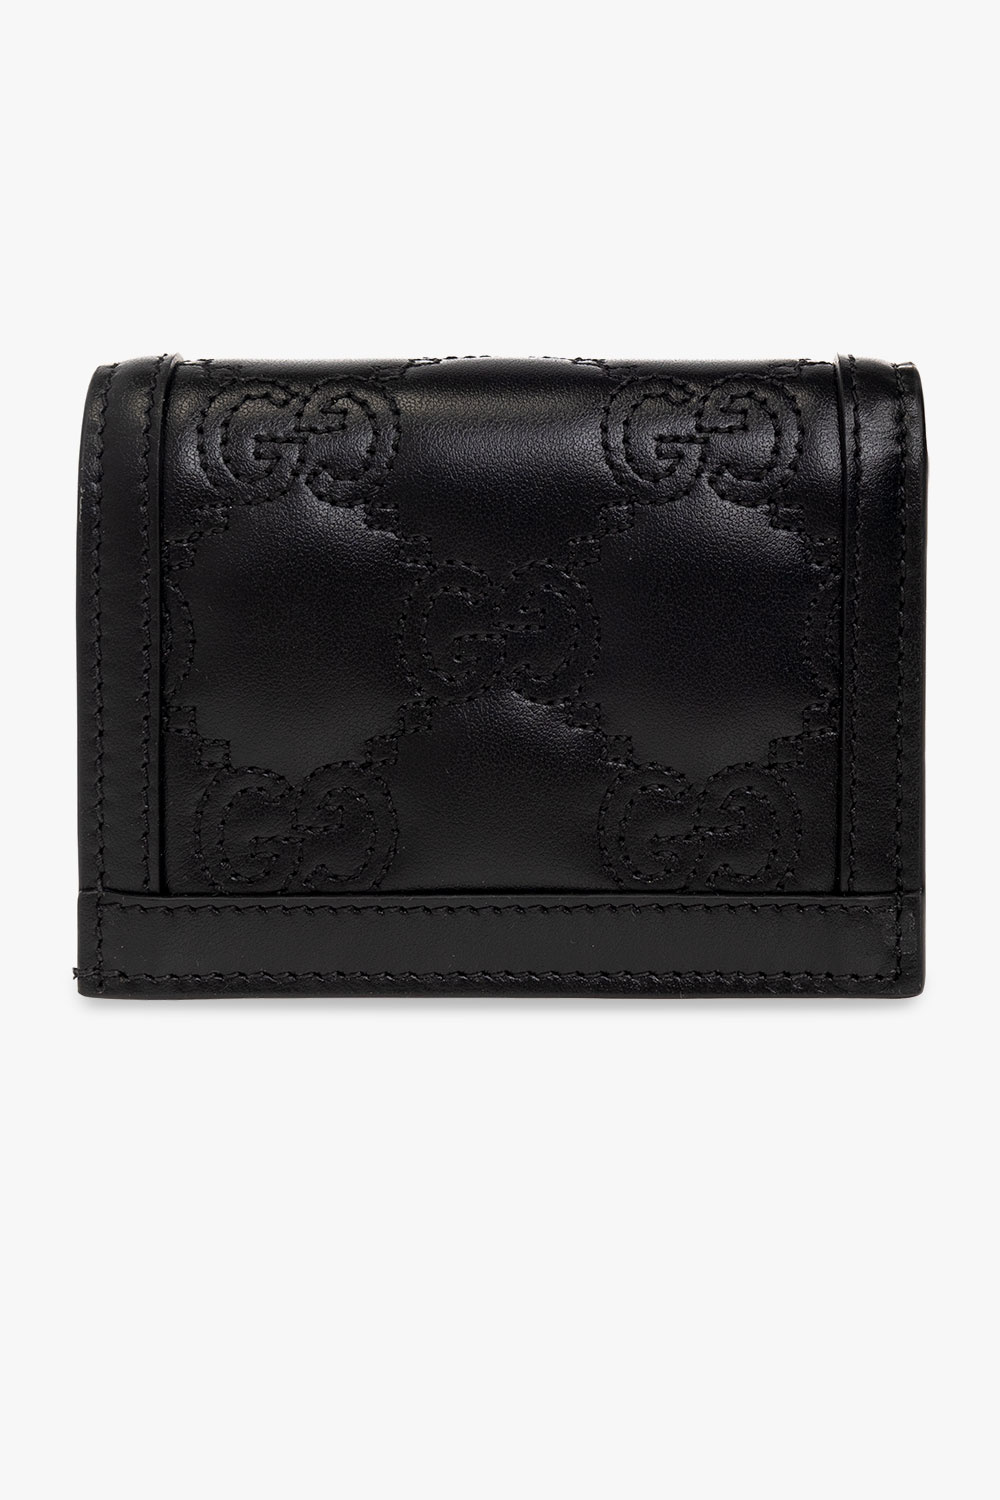 gucci shorts Leather wallet with logo